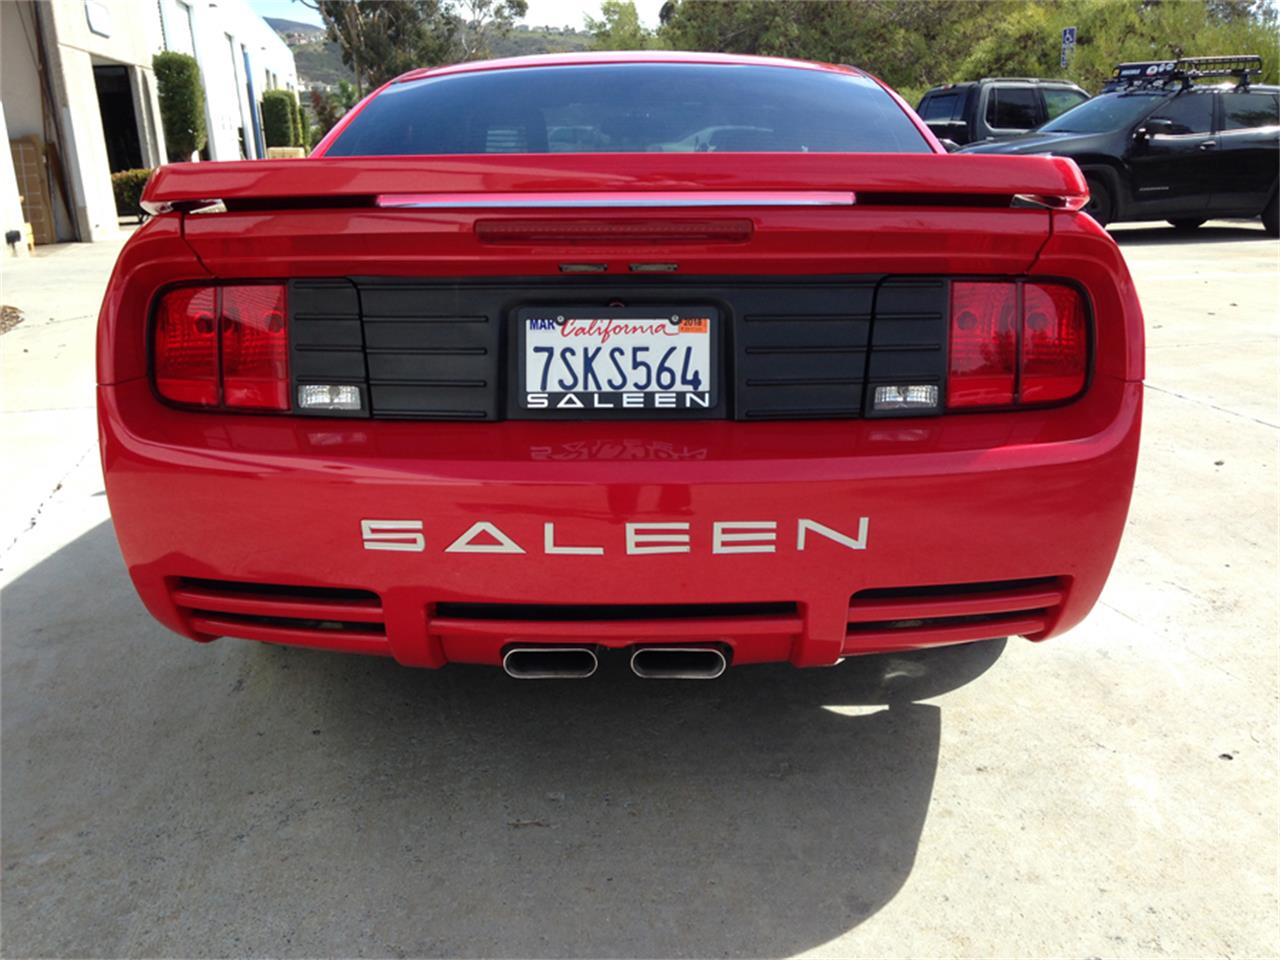 2006 Ford Mustang (Saleen) for sale in Spring Valley, CA – photo 4